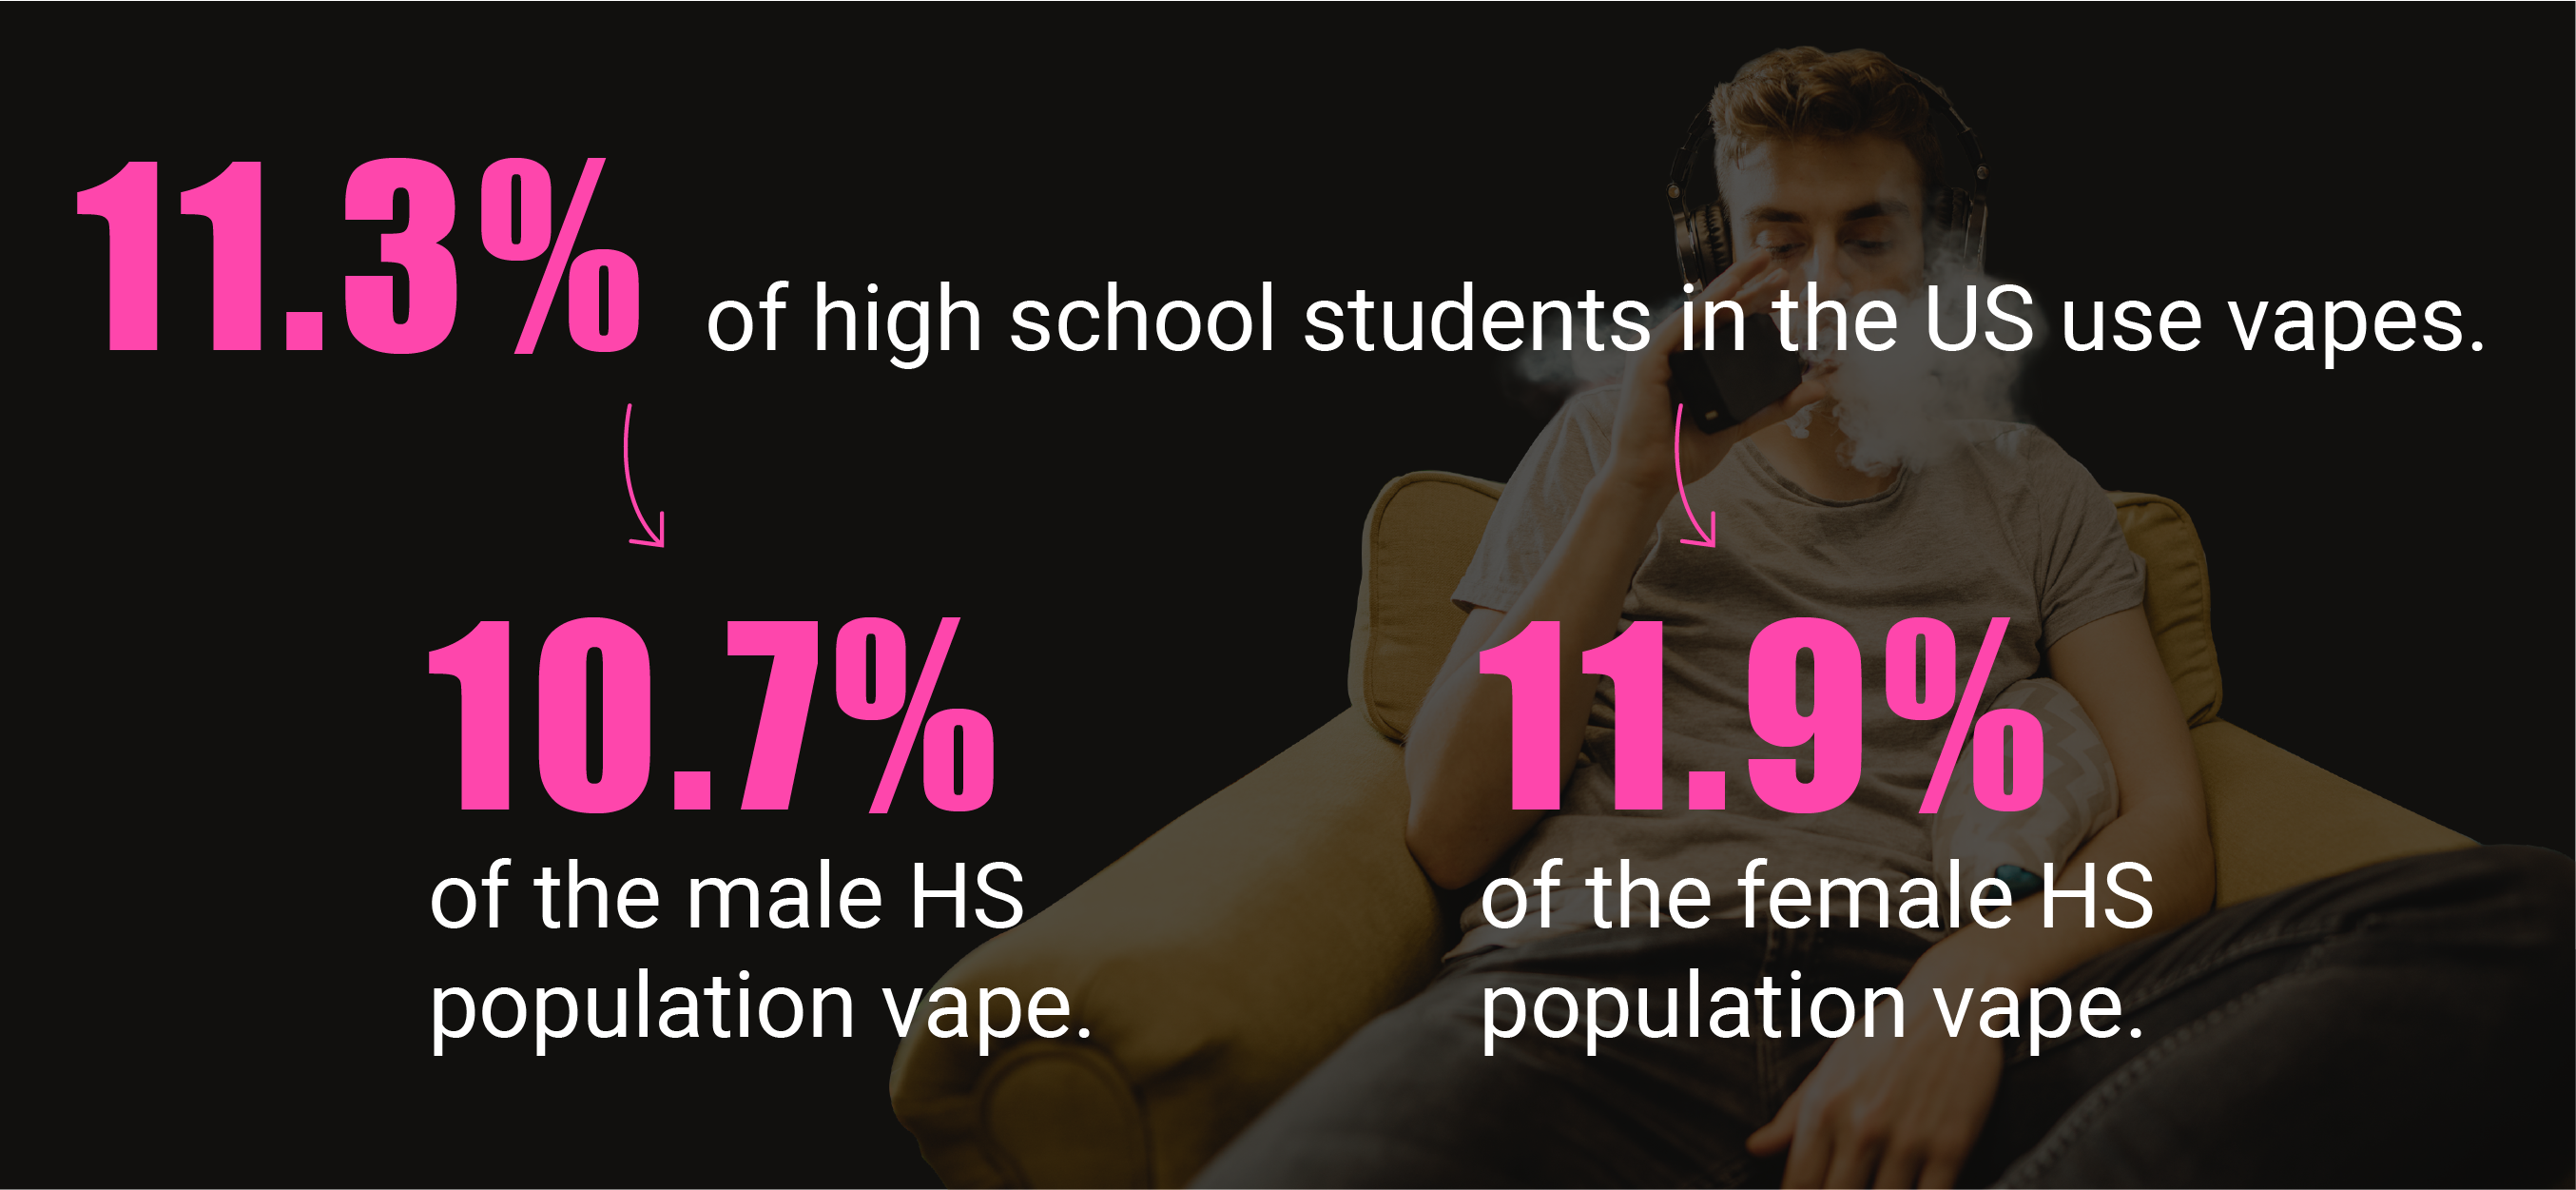 Call out text box showing the prevalence of vaping among high school students, affecting females more than males.